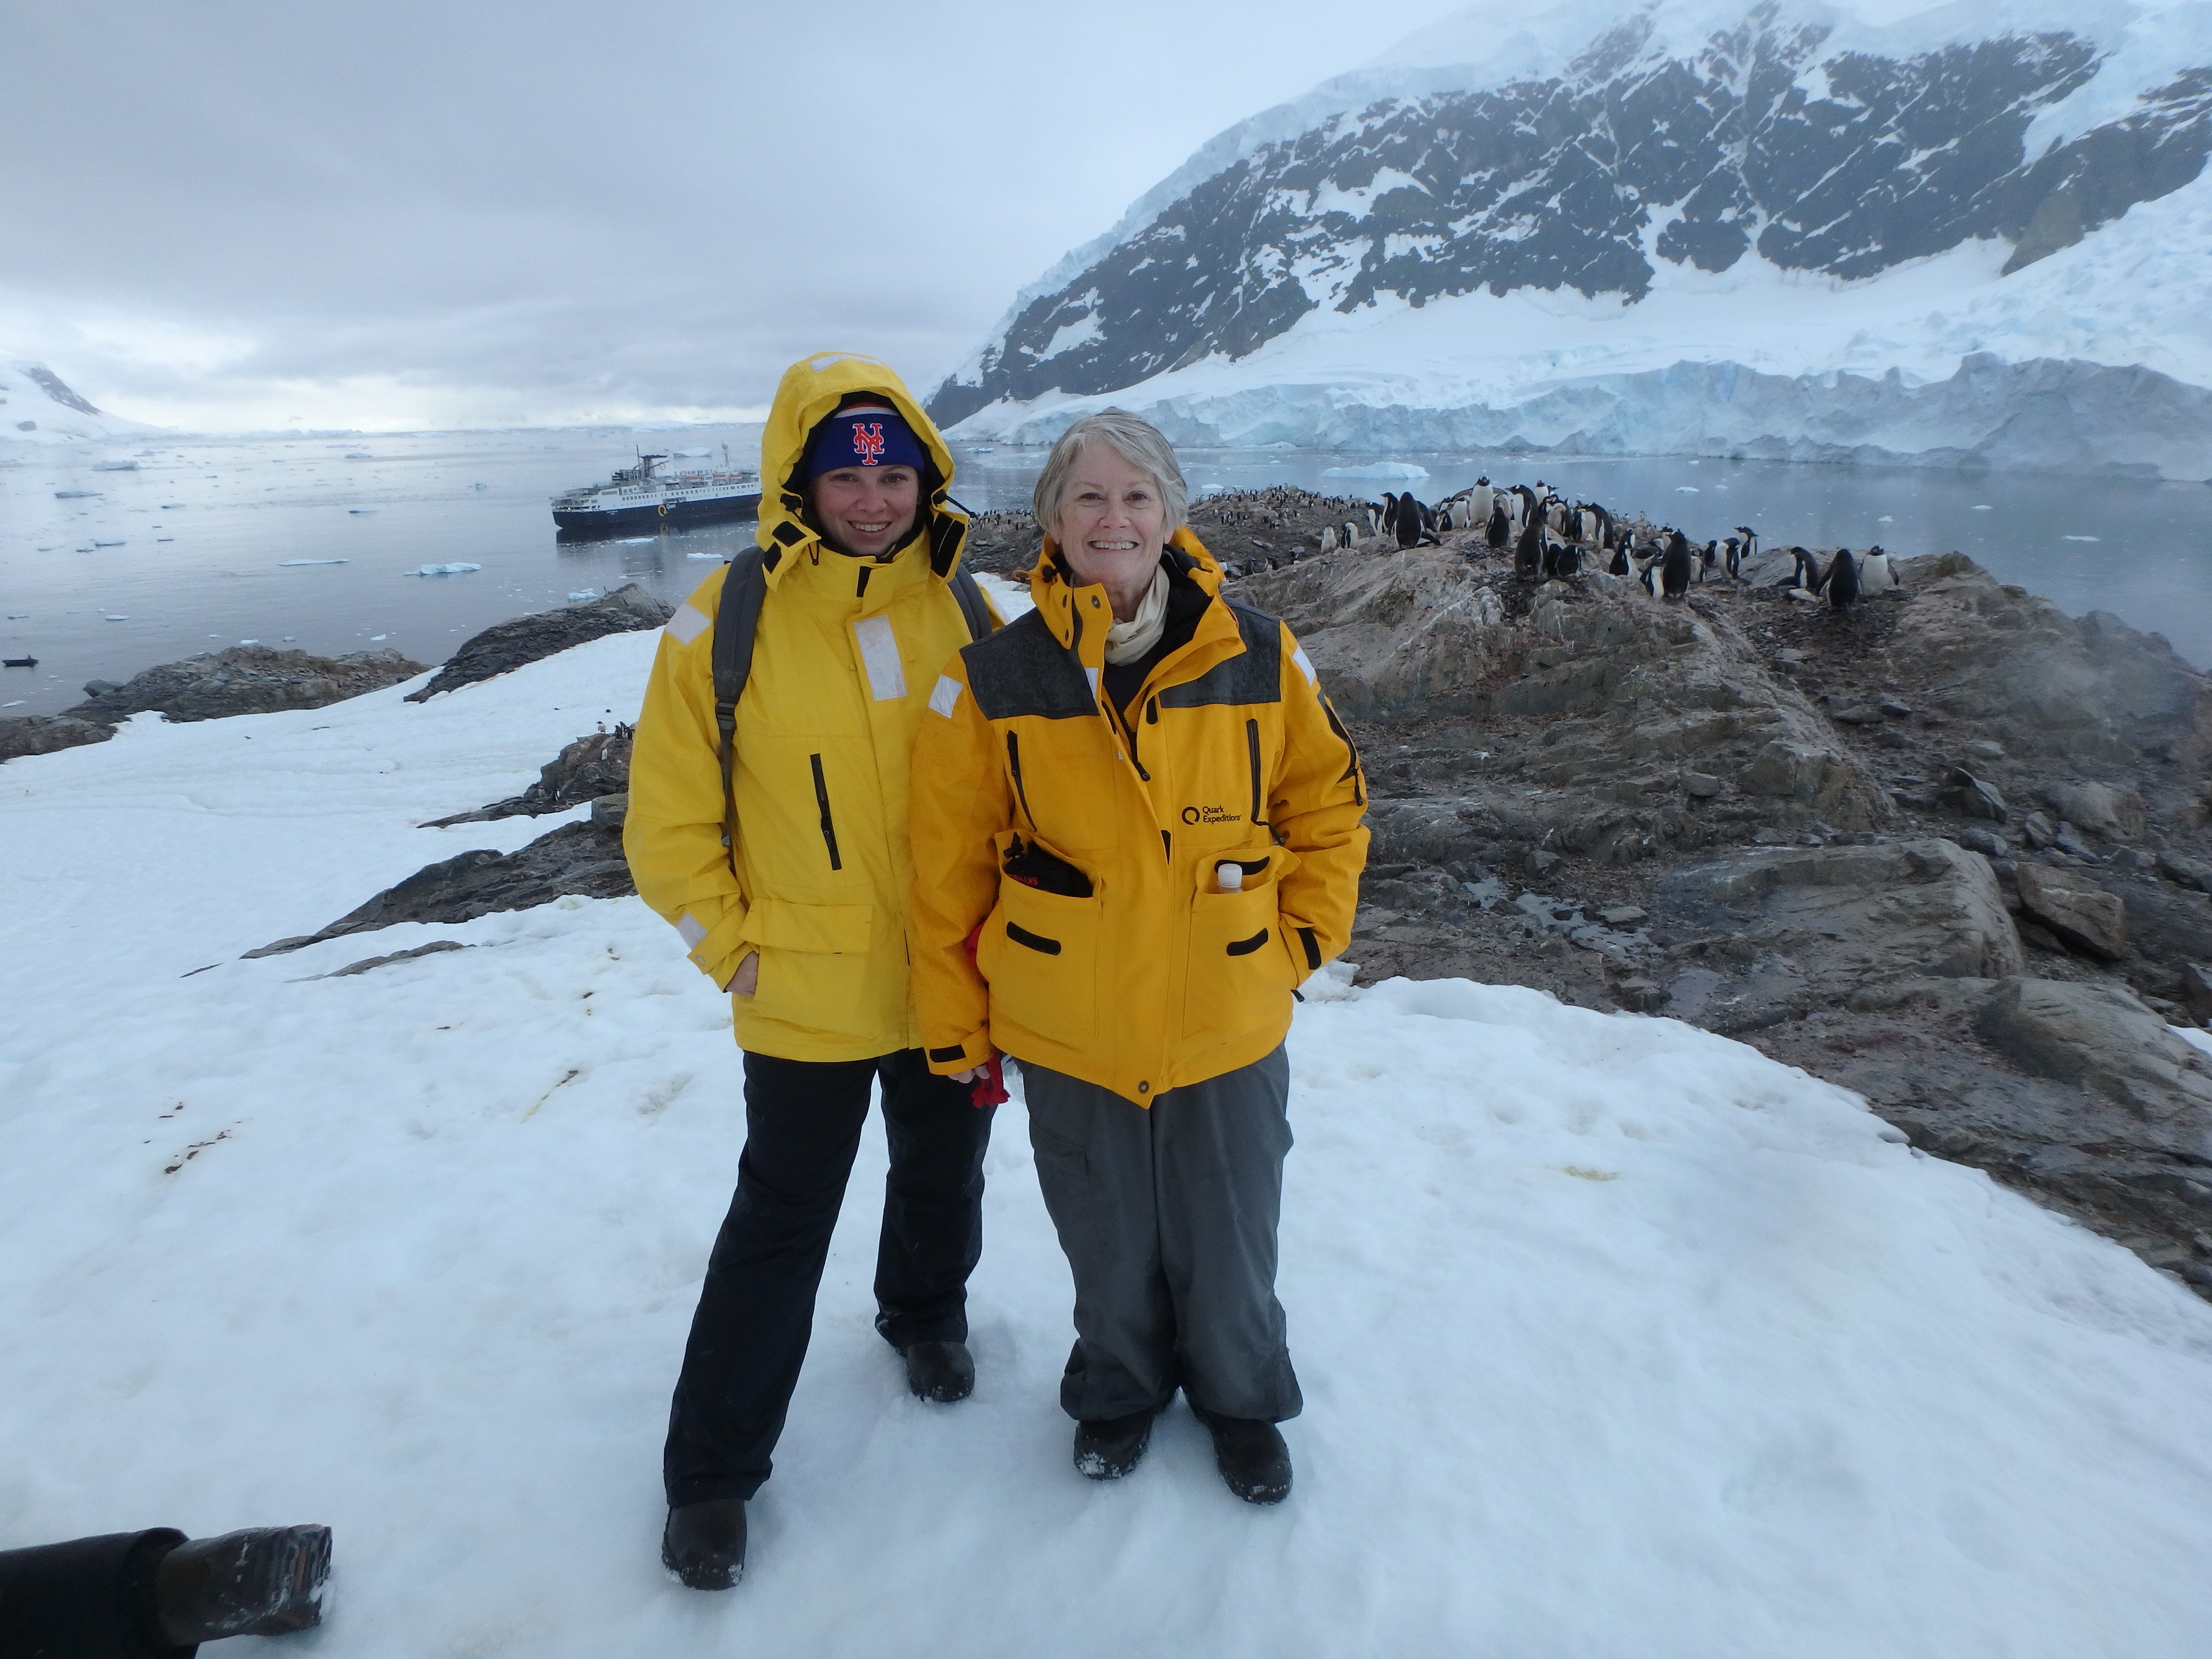 Katrina and her aunt pose with Adelie penguins in Antarctica